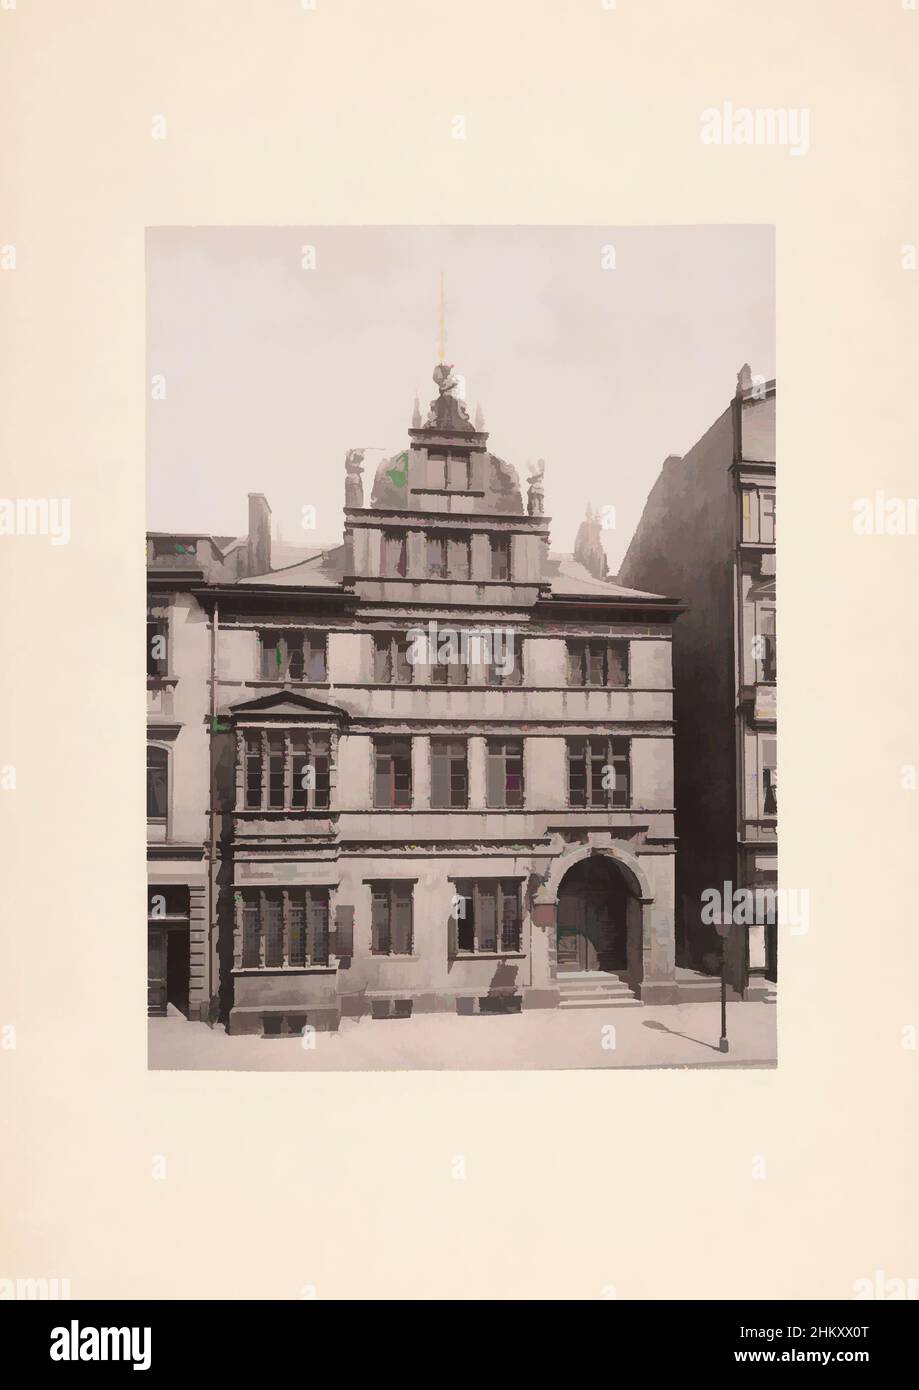 Art inspired by Façade of the Haus der Väter at Hanover, HANNOVER. - HAUS DER VäTER., Hannover, c. 1875 - c. 1900, cardboard, paper, collotype, height 267 mm × width 199 mm, Classic works modernized by Artotop with a splash of modernity. Shapes, color and value, eye-catching visual impact on art. Emotions through freedom of artworks in a contemporary way. A timeless message pursuing a wildly creative new direction. Artists turning to the digital medium and creating the Artotop NFT Stock Photo